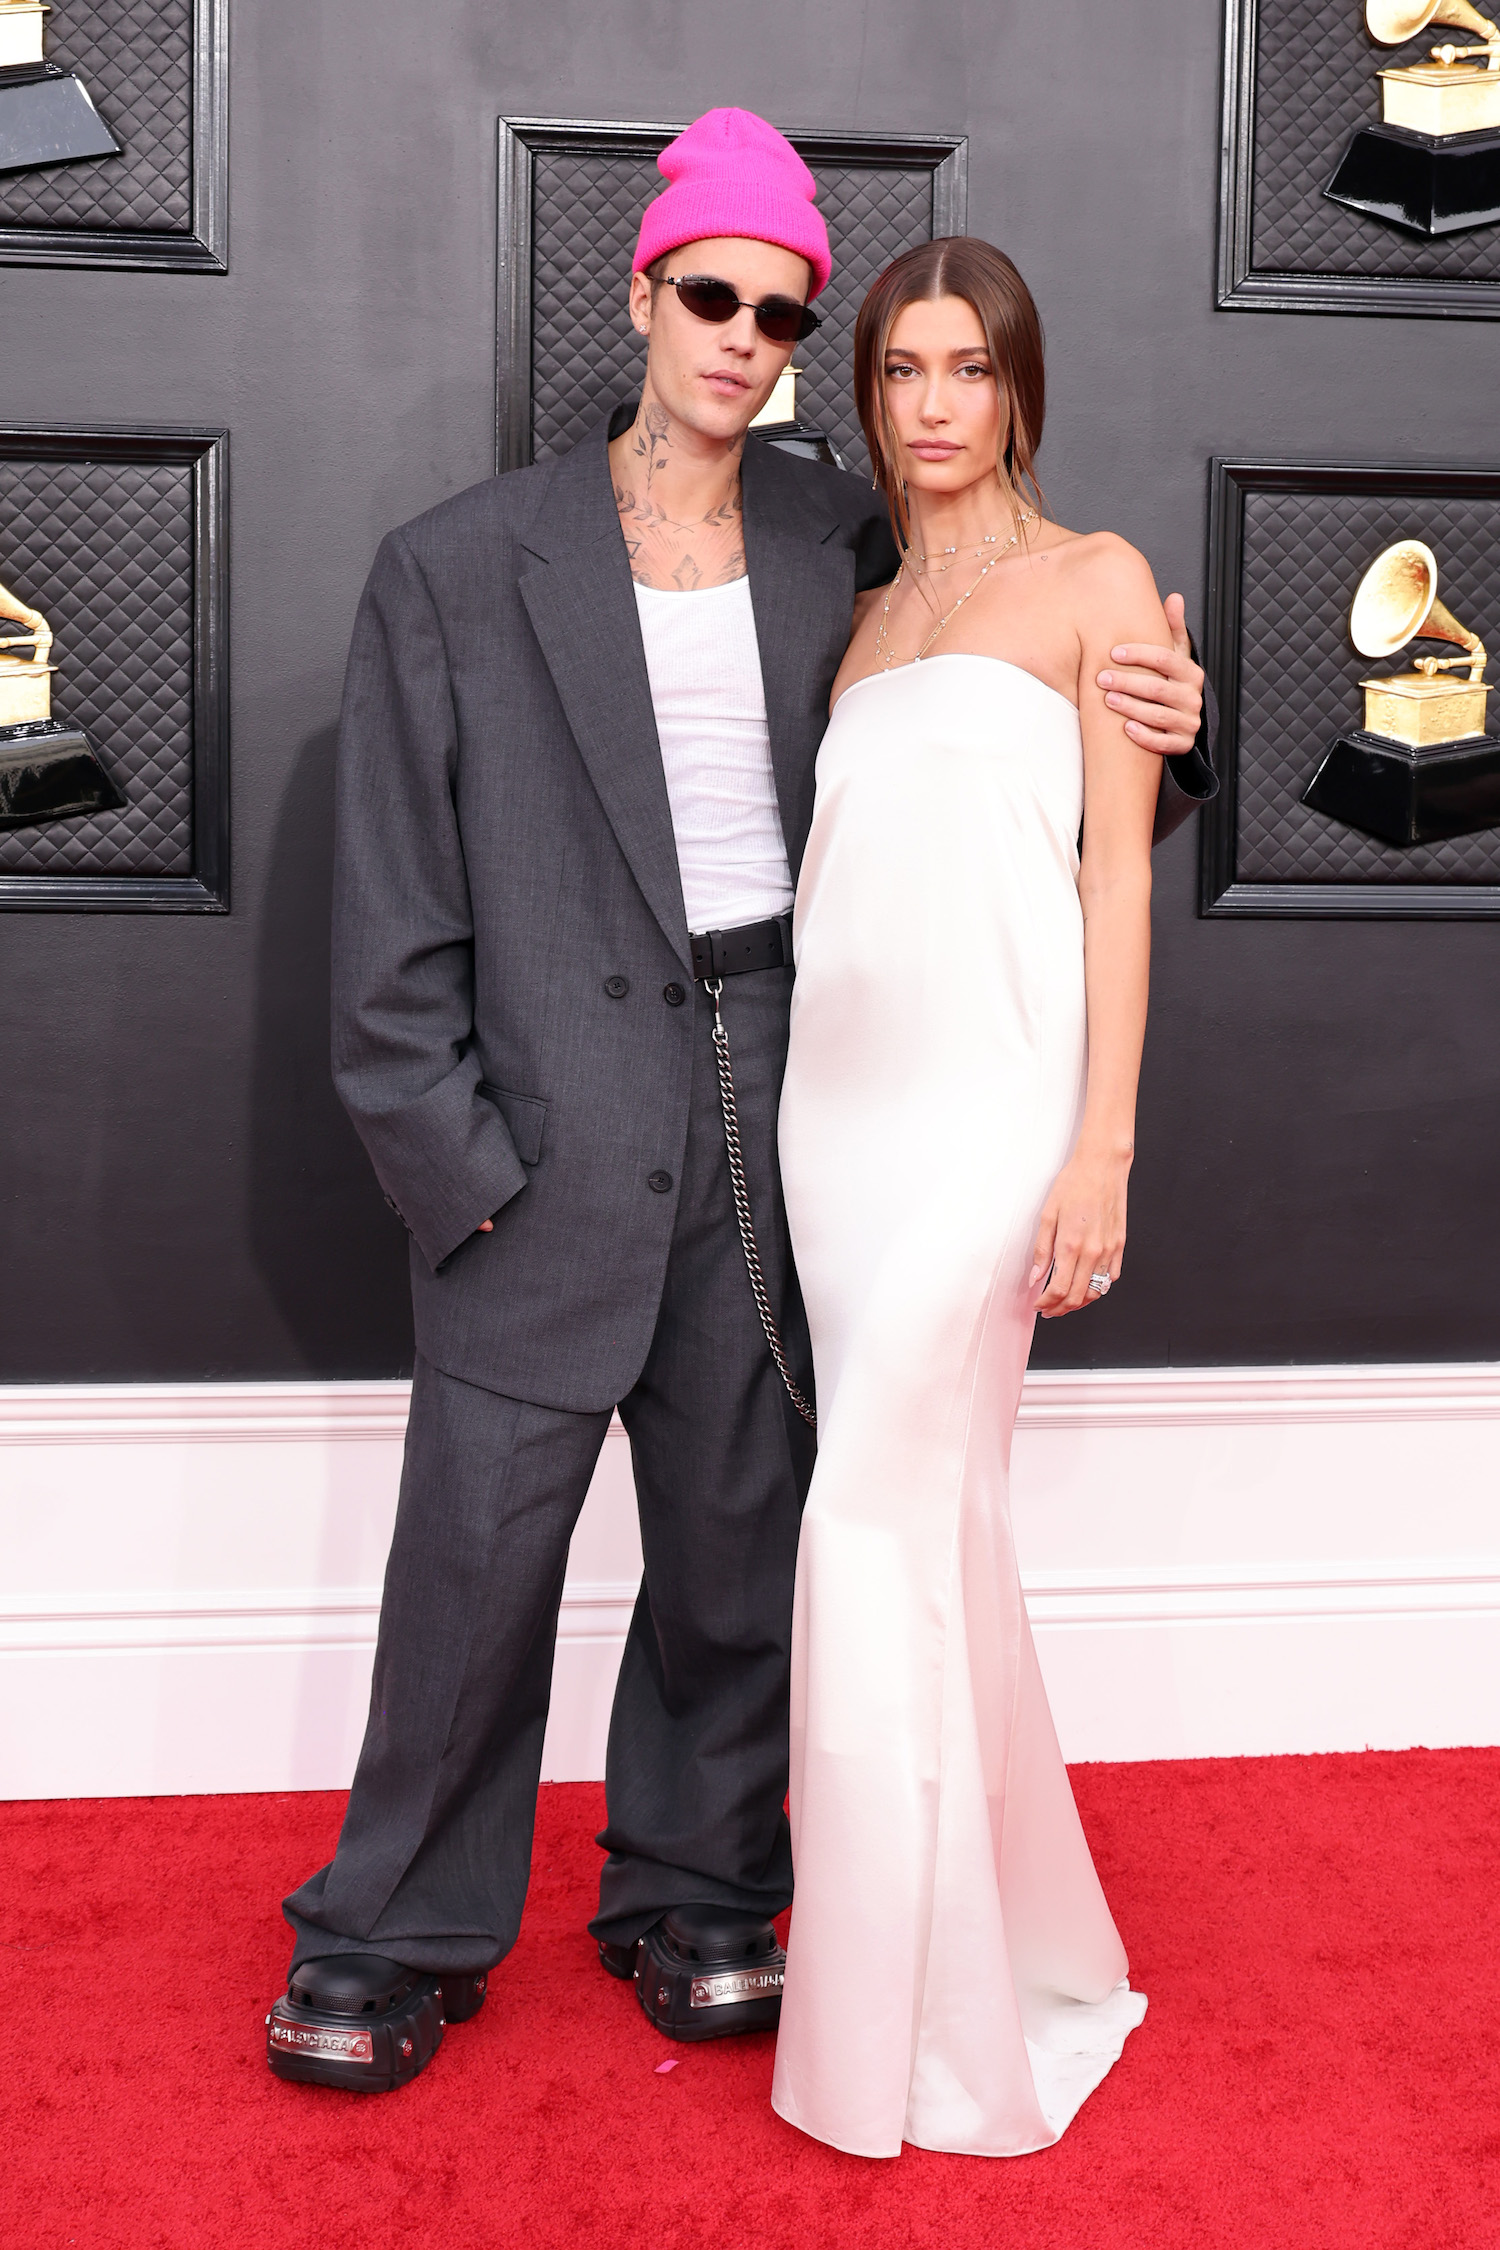 Justin Bieber and Hailey Bieber at the Grammys 2022